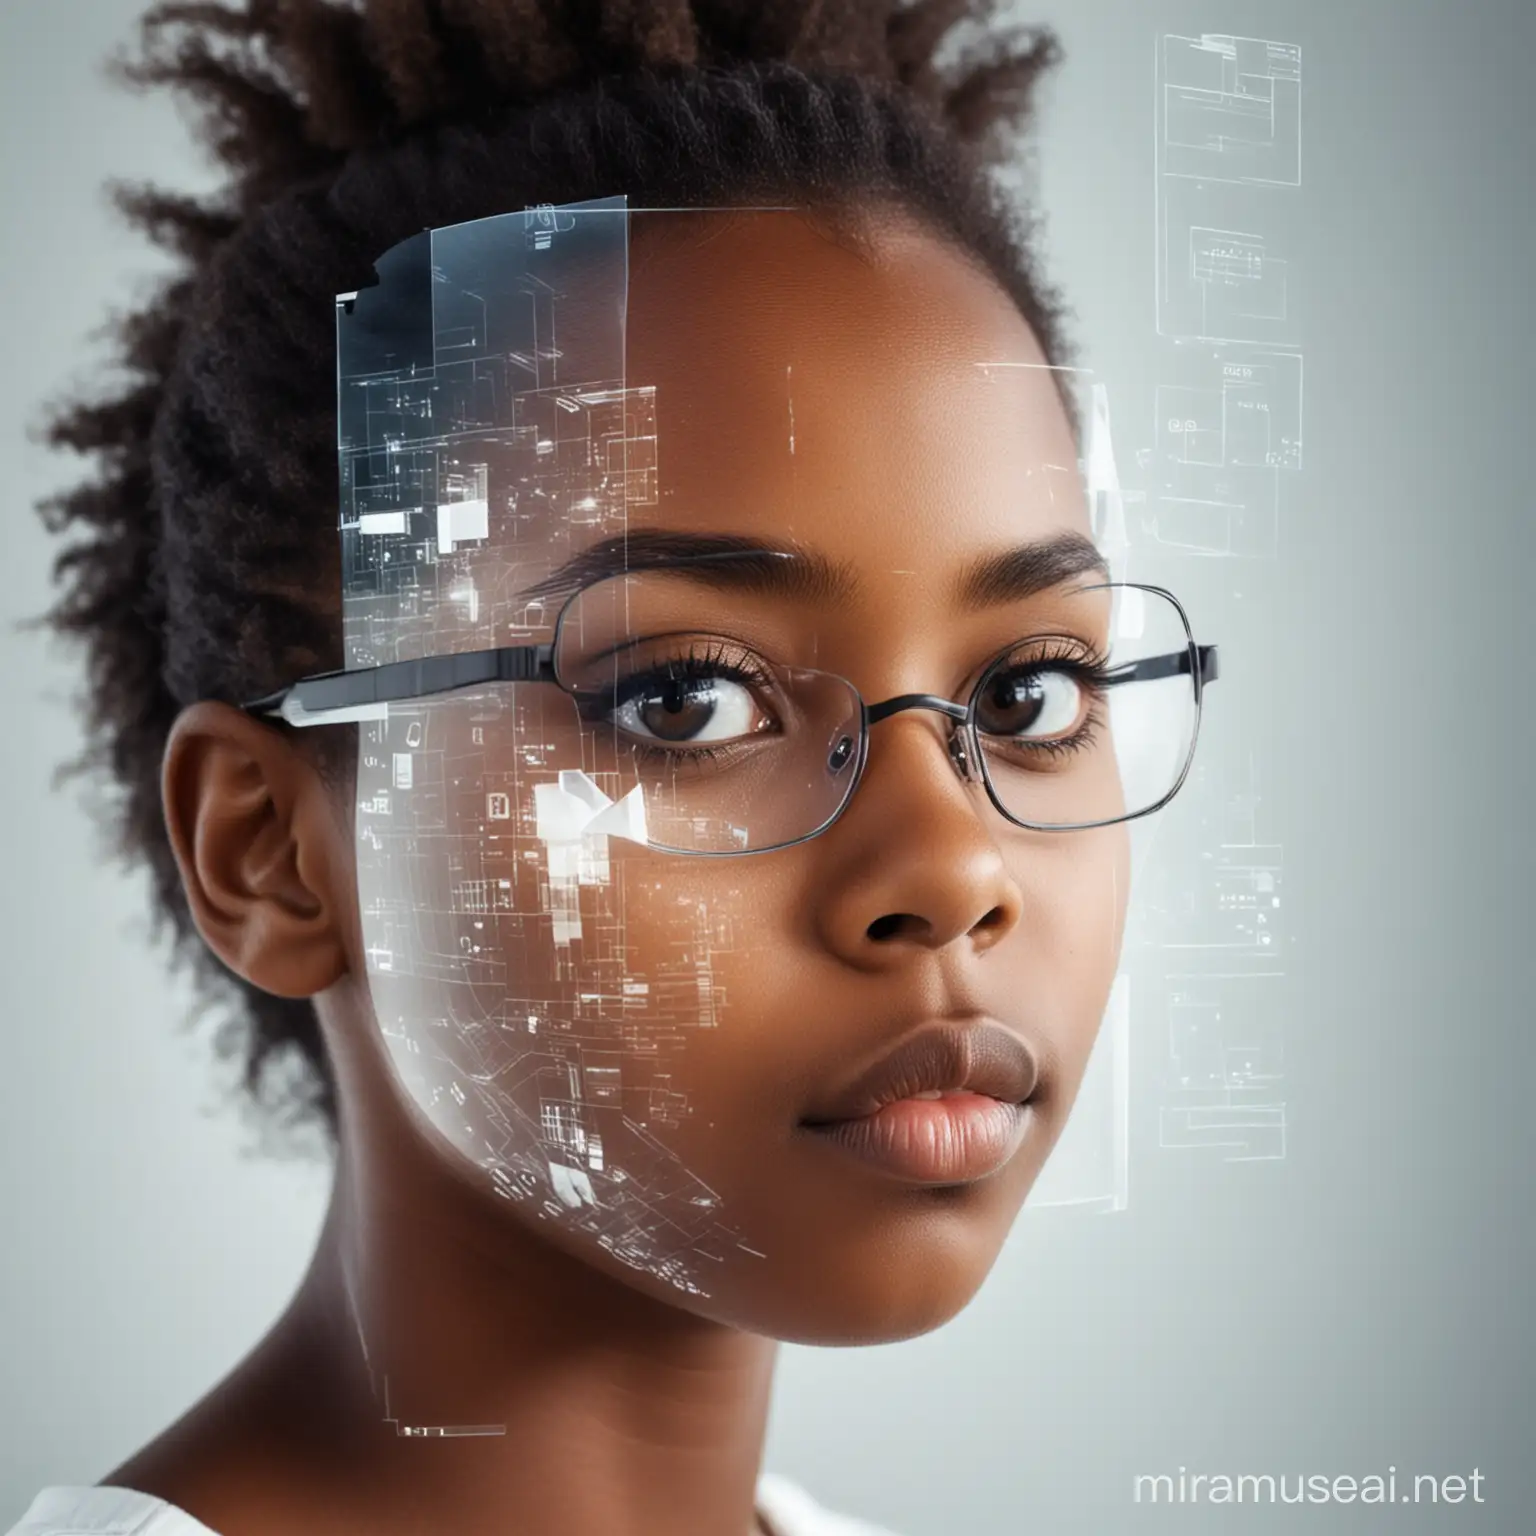 Double Exposure Portrait of Young Black Girl with ICT Images and Glasses